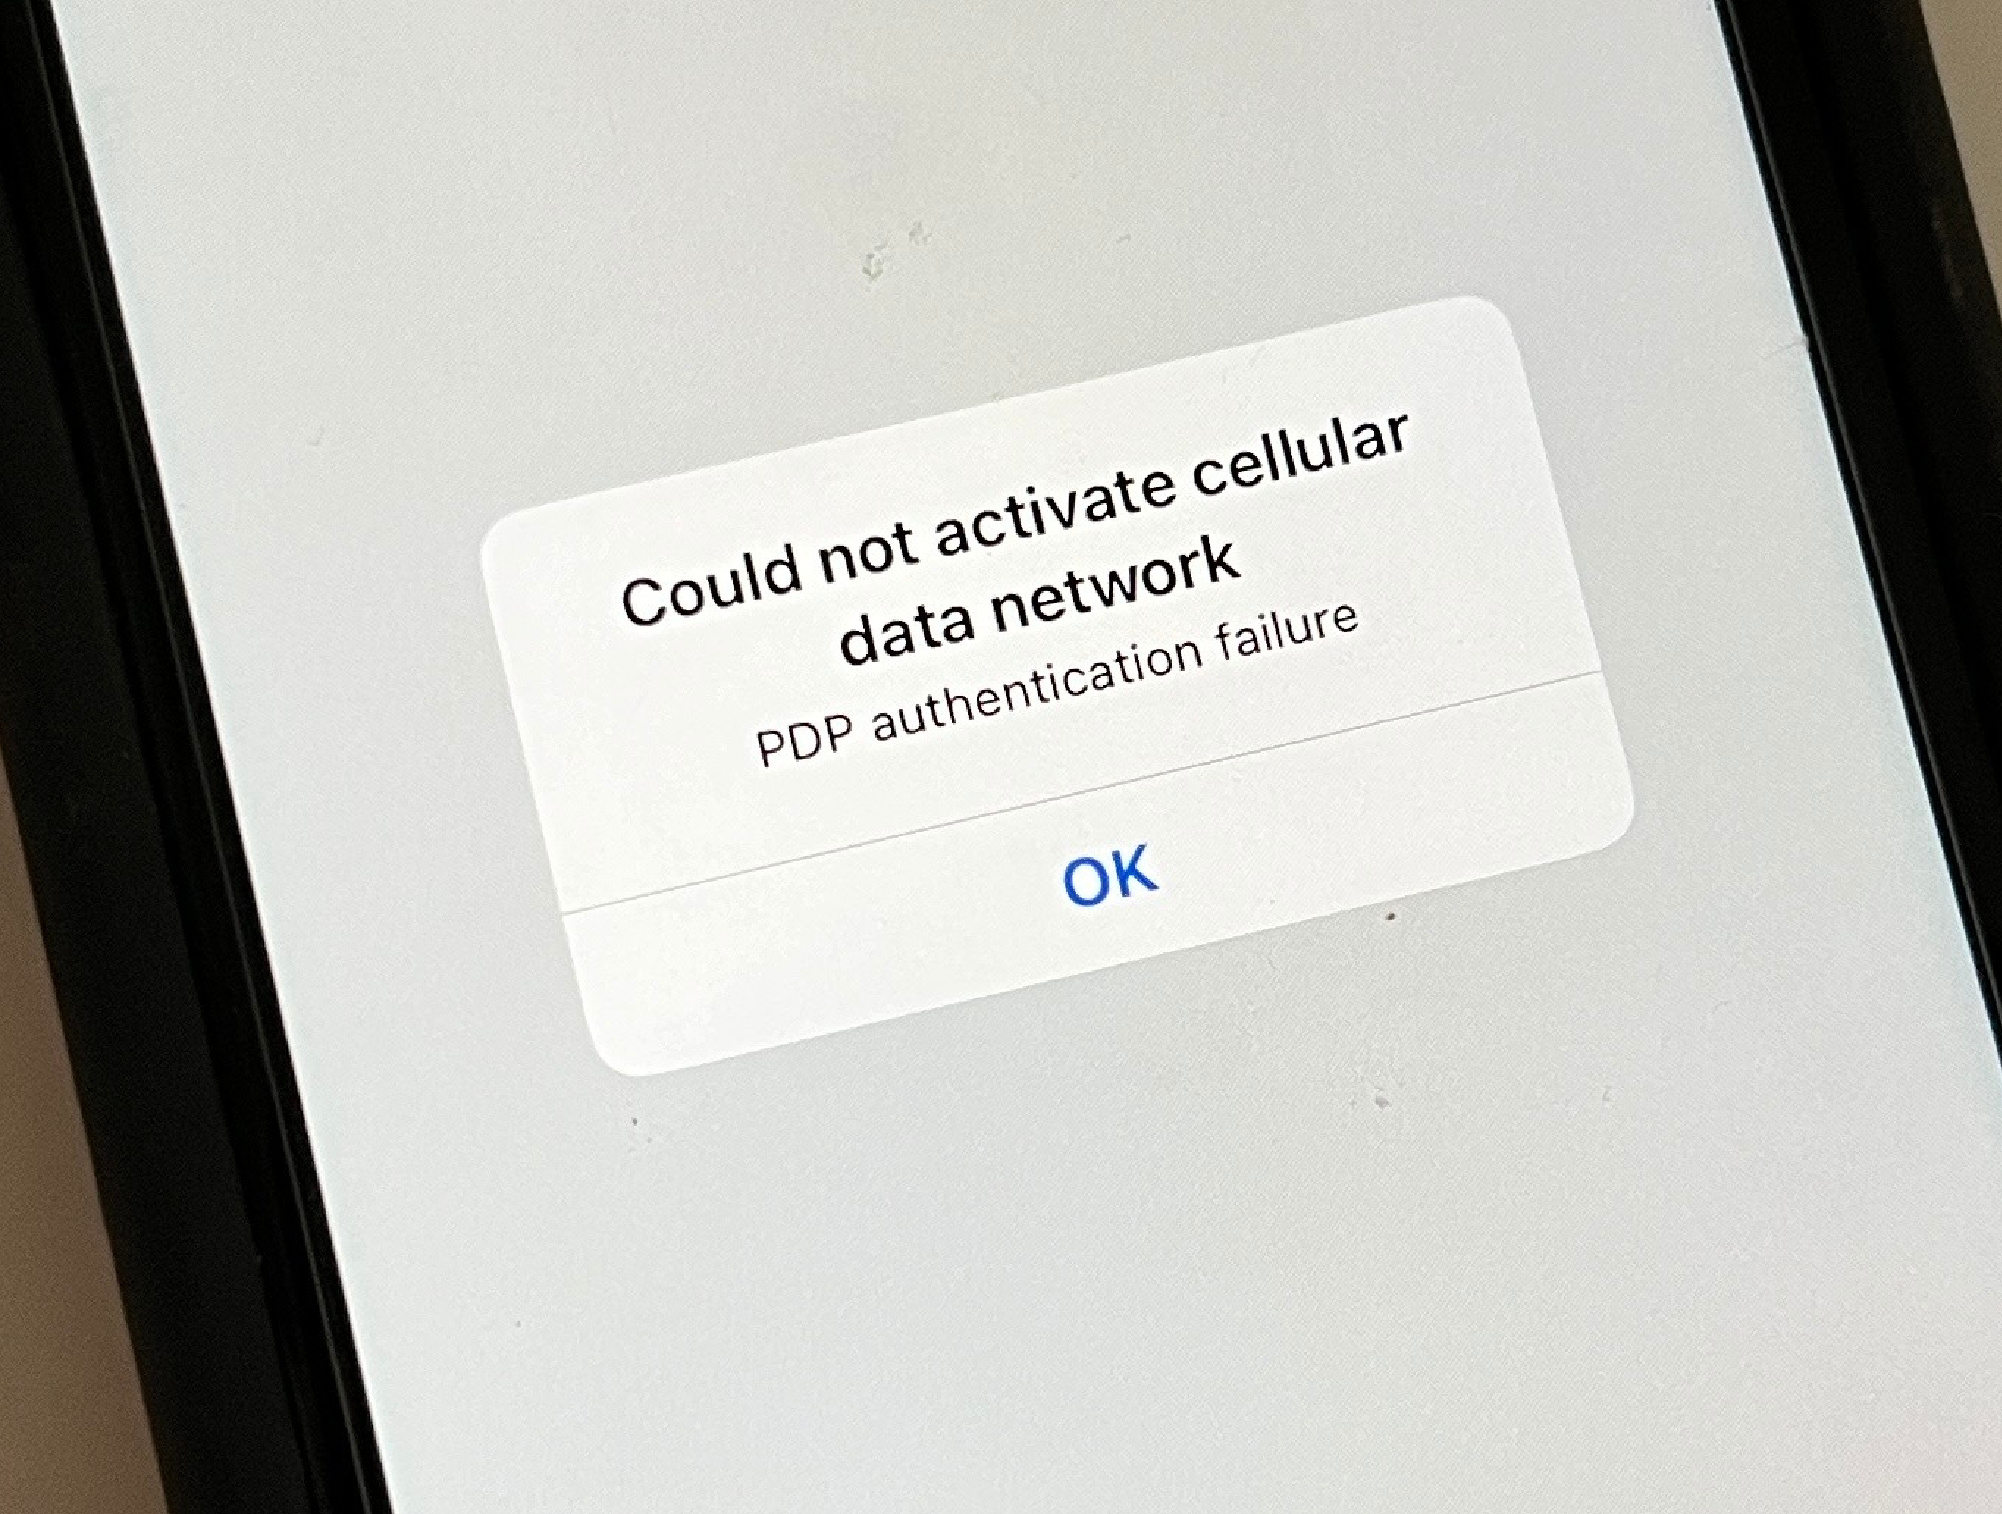 Could_not_activate_cellular_data_network_PDP_authentication_failure.jpg